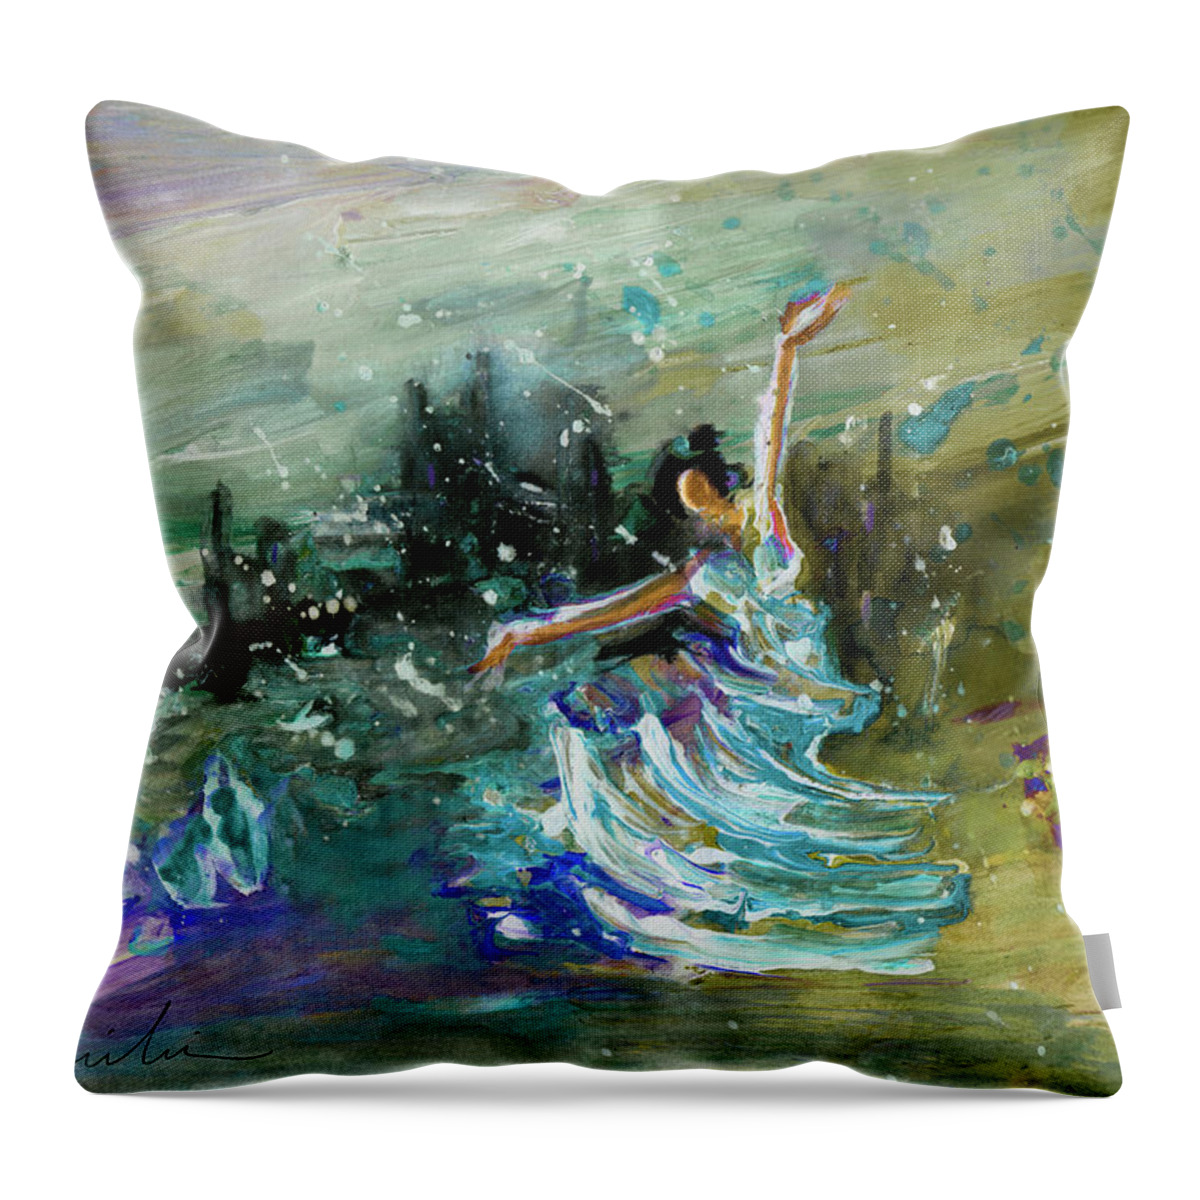 Spain Throw Pillow featuring the painting Impression Of Flamenco 02 by Miki De Goodaboom